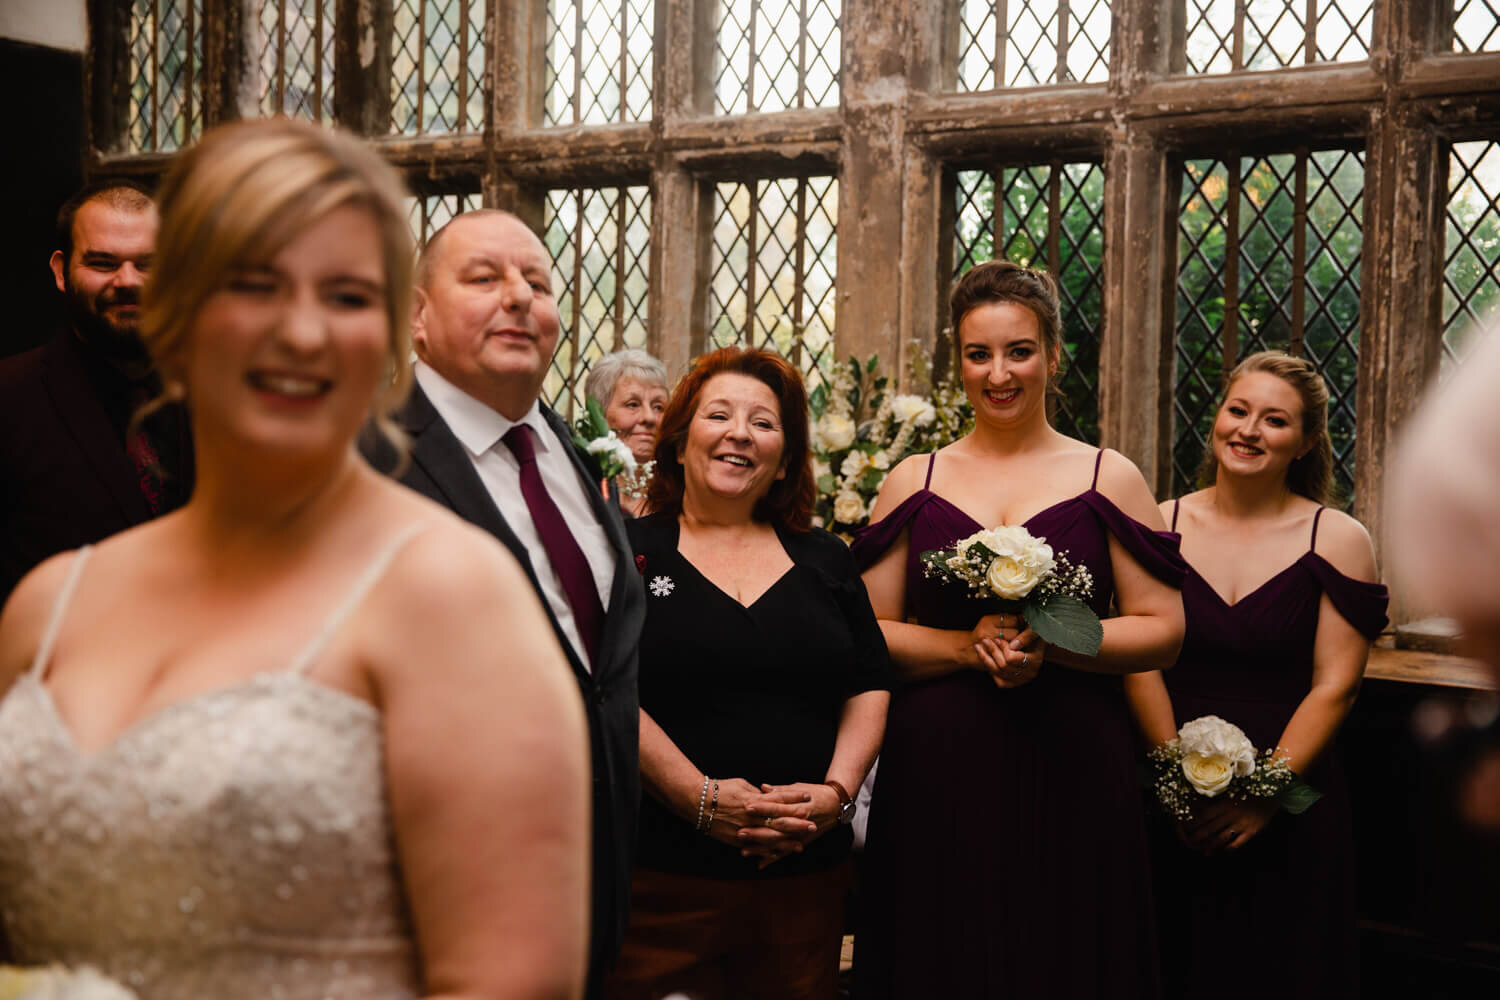 bridal party share joke as bride laughs in foreground of photograph